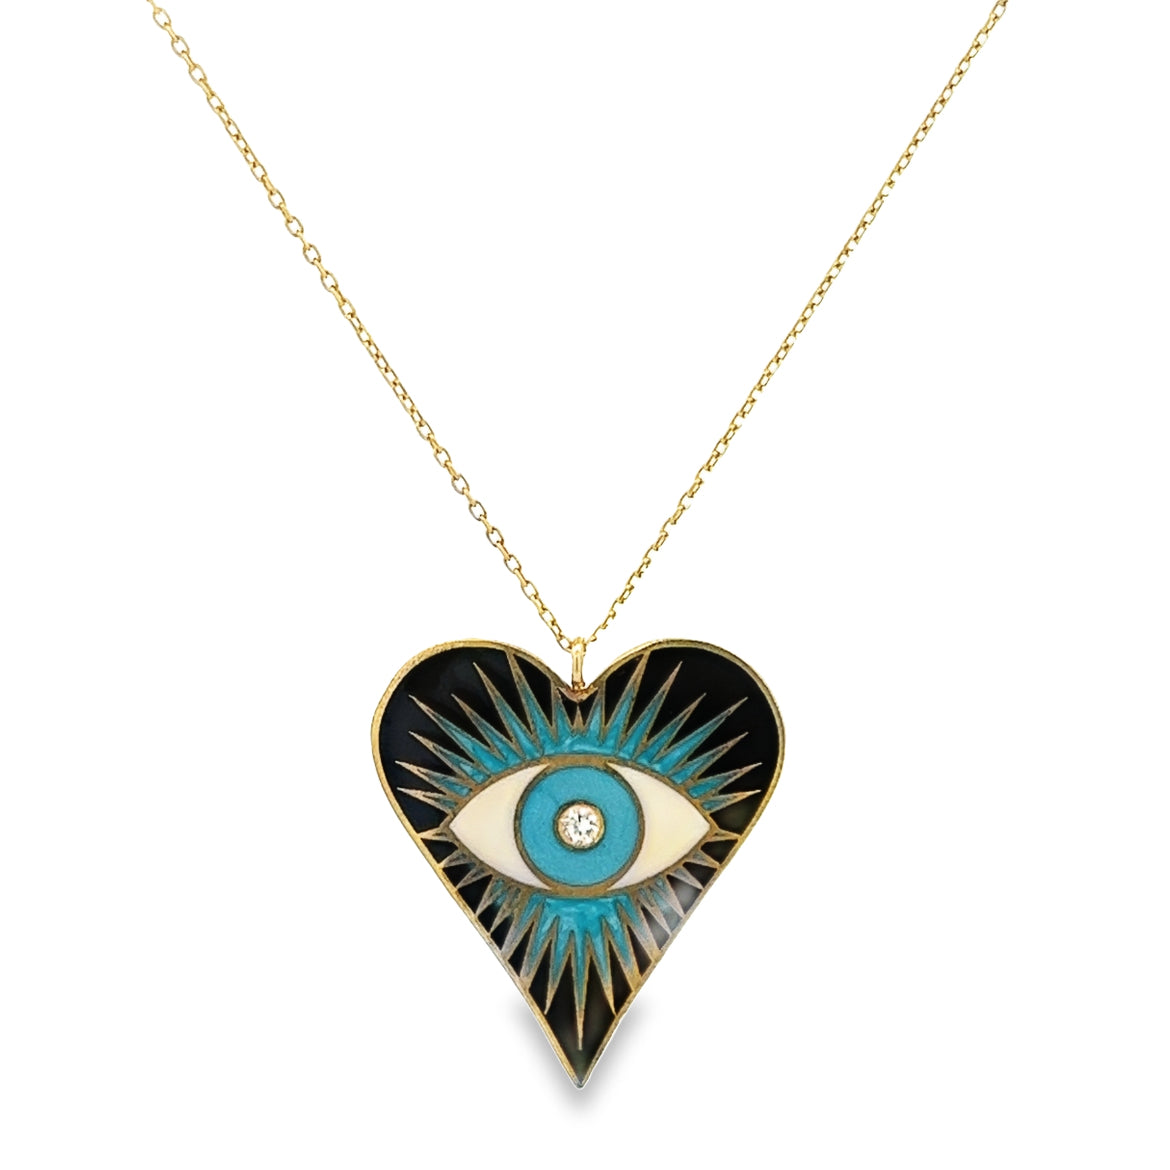 925 GOLD PLATED BLACK EVIL EYE HEART PENDANT WITH BABY BLUE AND WHITE ENAMEL